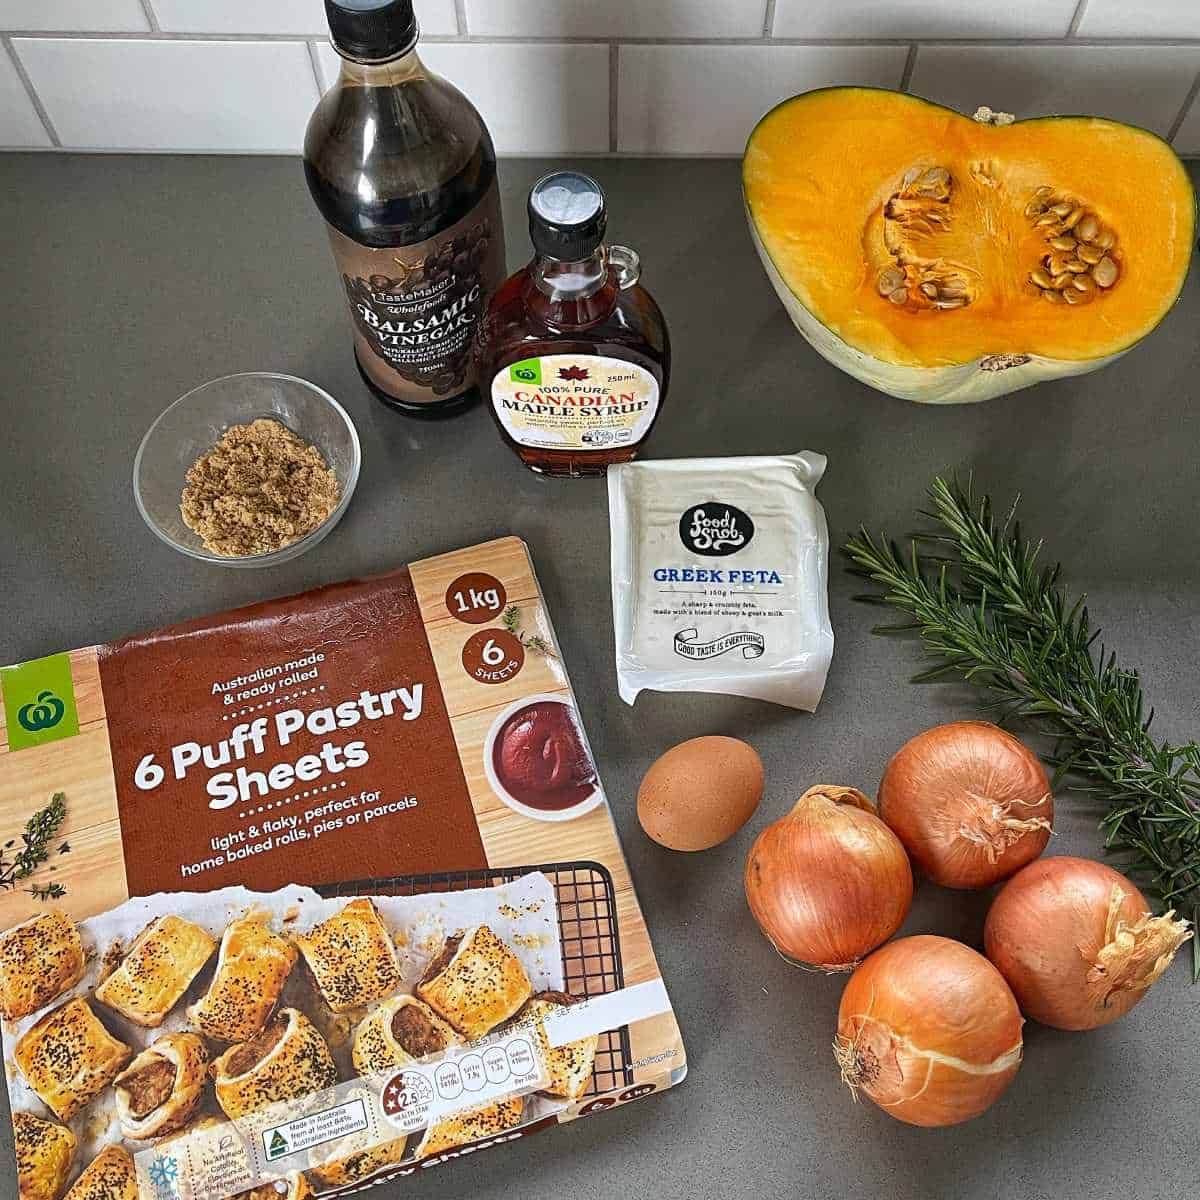 The ingredients for pumpkin and feta tart sitting on a grey bench top